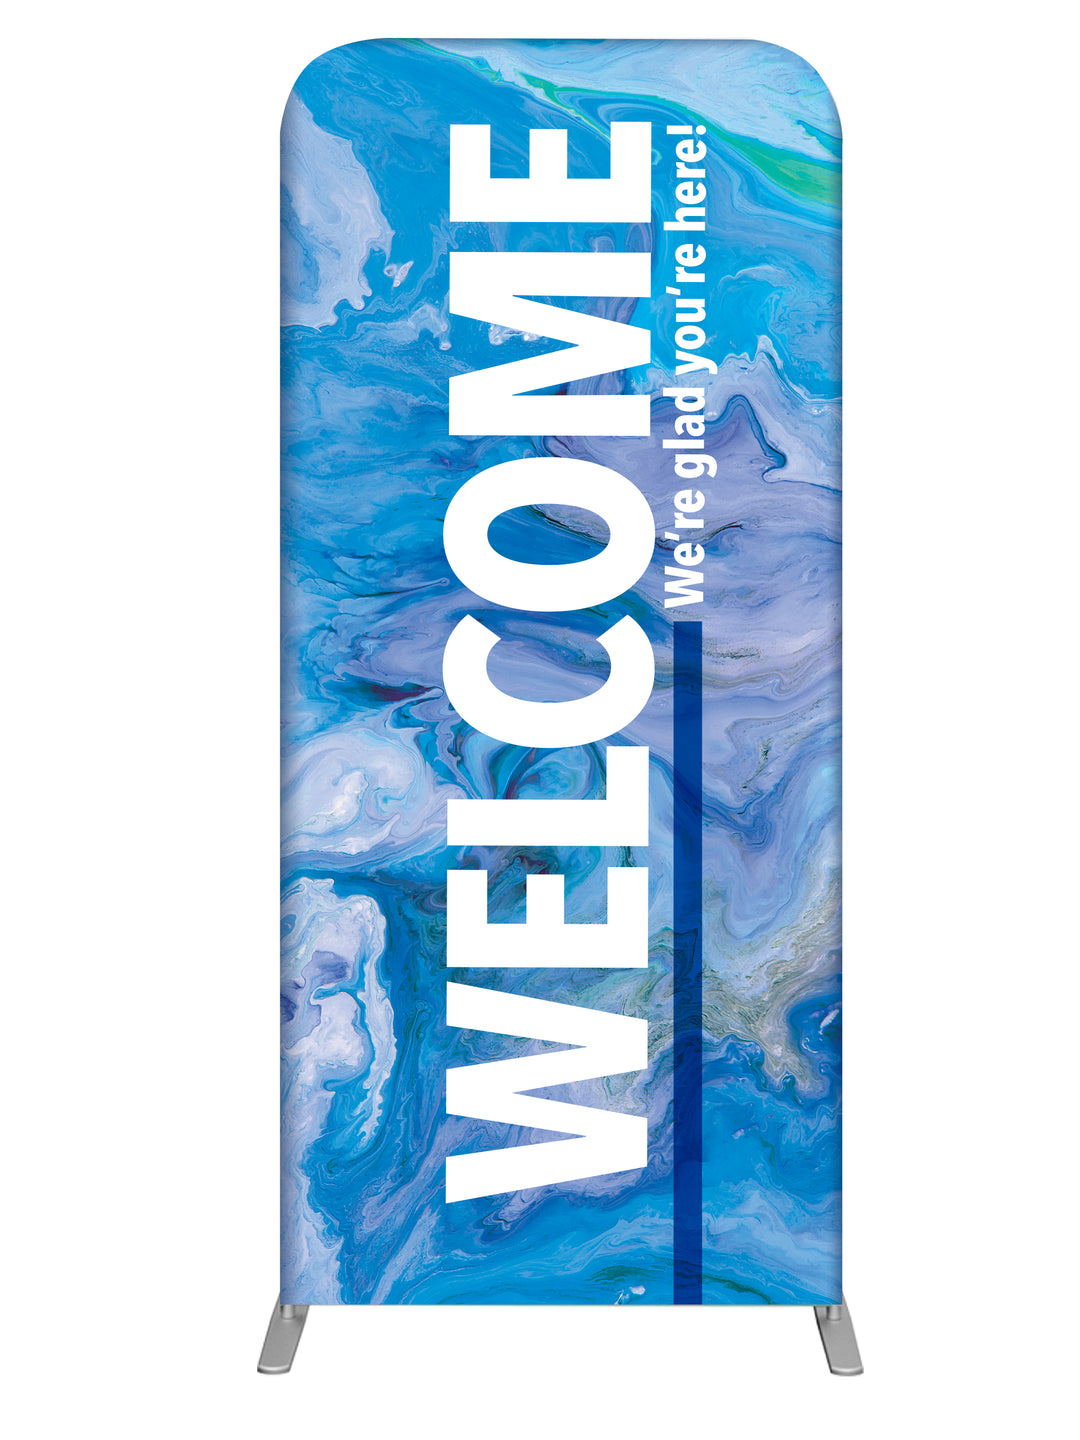 Church Welcome Tube Display Banner. Gospel Impressions design in Blue, Purple, Red and Teal